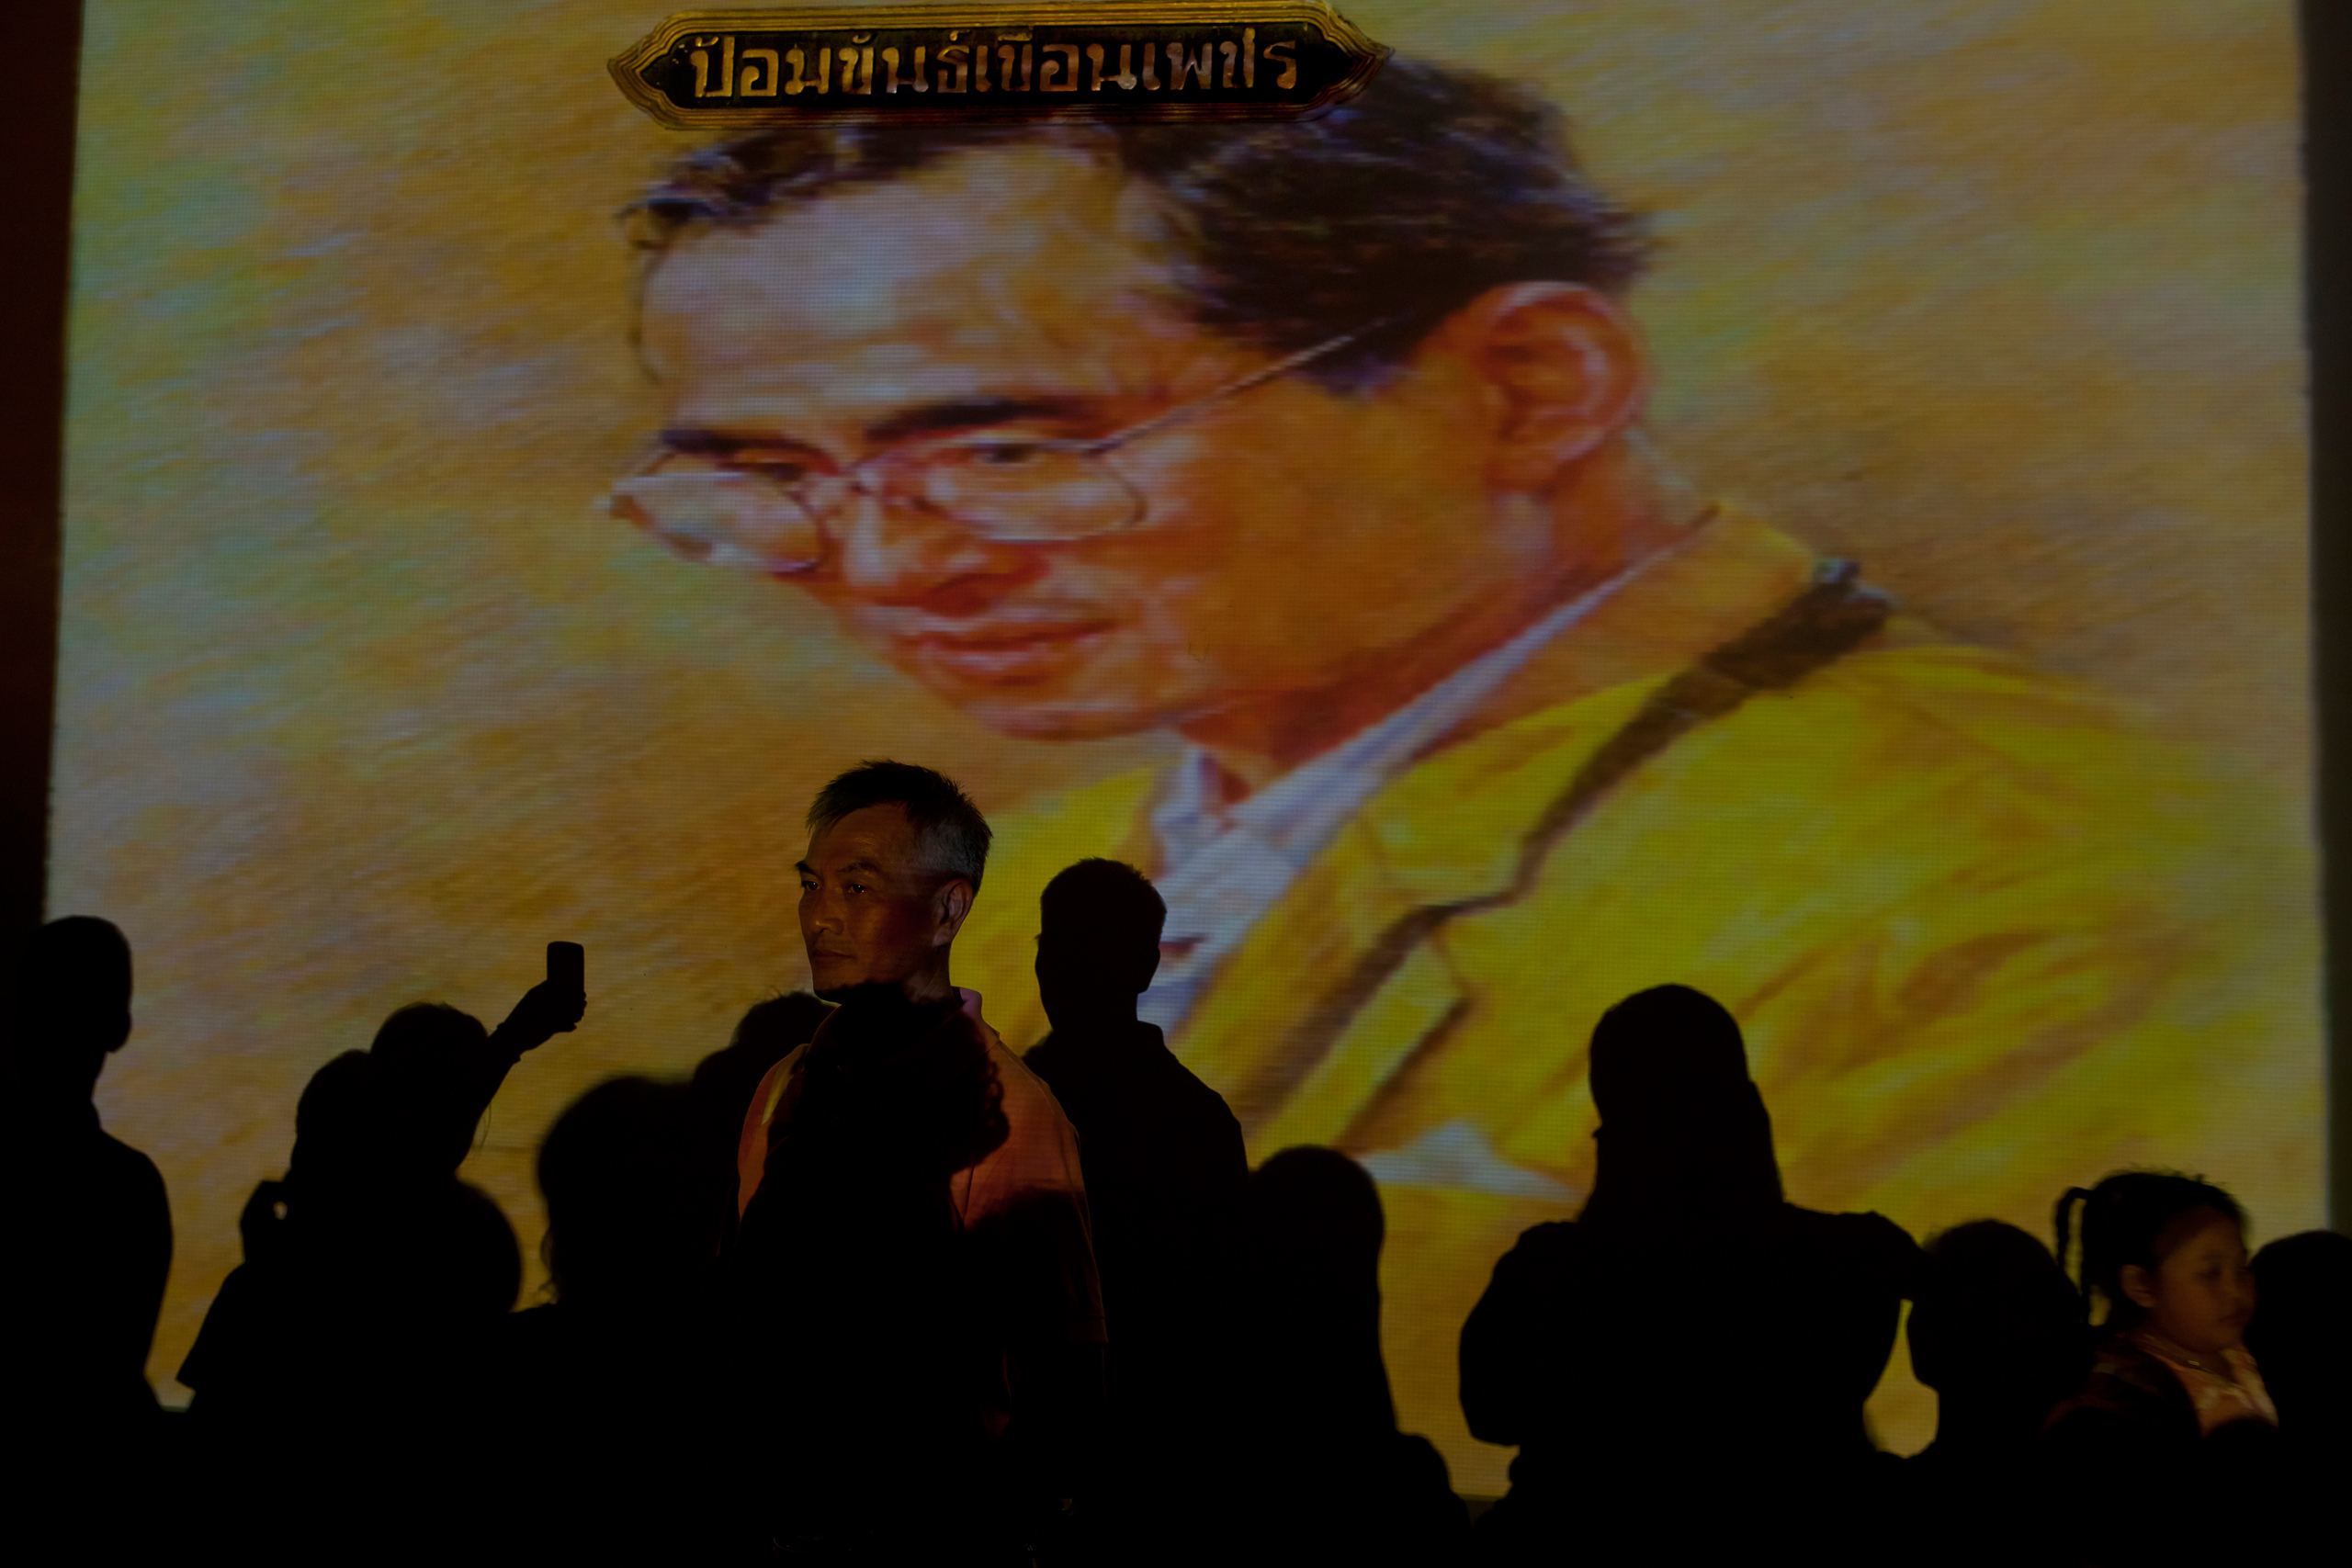 People in front of an image of King Bhumibol Adulyadej of Thailand during a celebration of his 84th birthday, Bangkok, Thailand, Dec. 5, 2011.